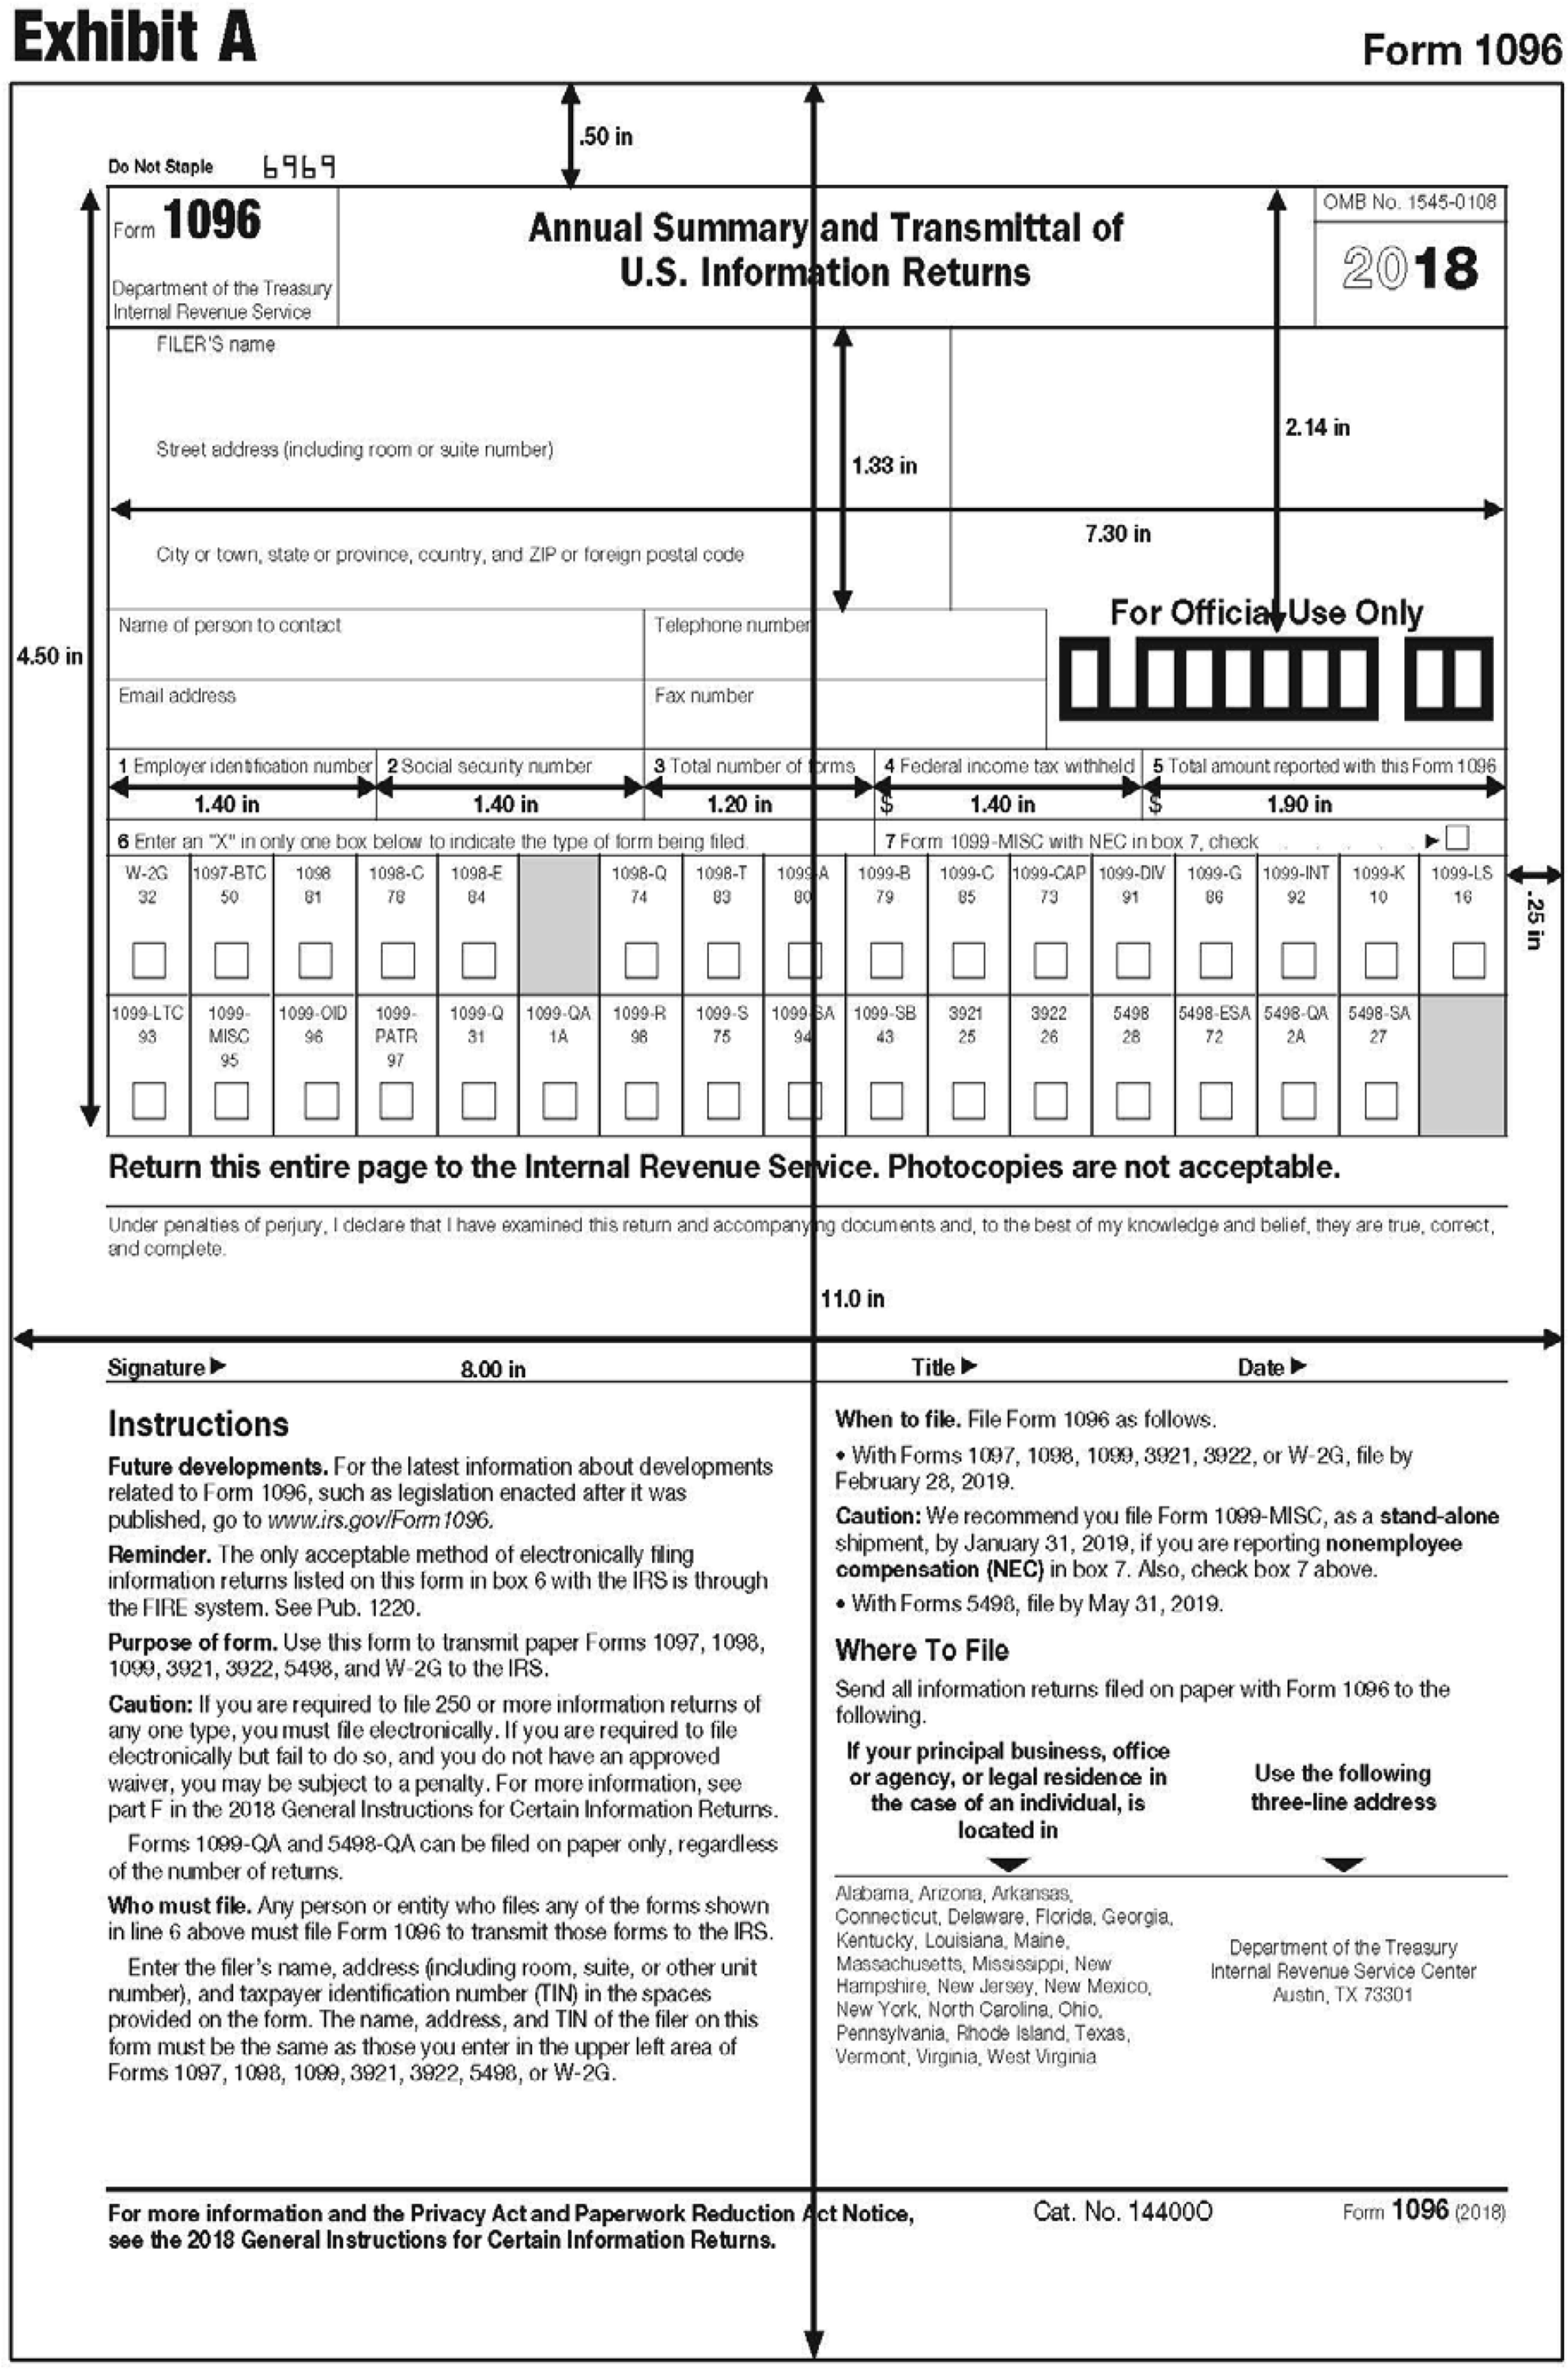 2012 IRS Tax Form 1099-MISC carbonless + 2 Form 1096 10 recipients 5 sheets